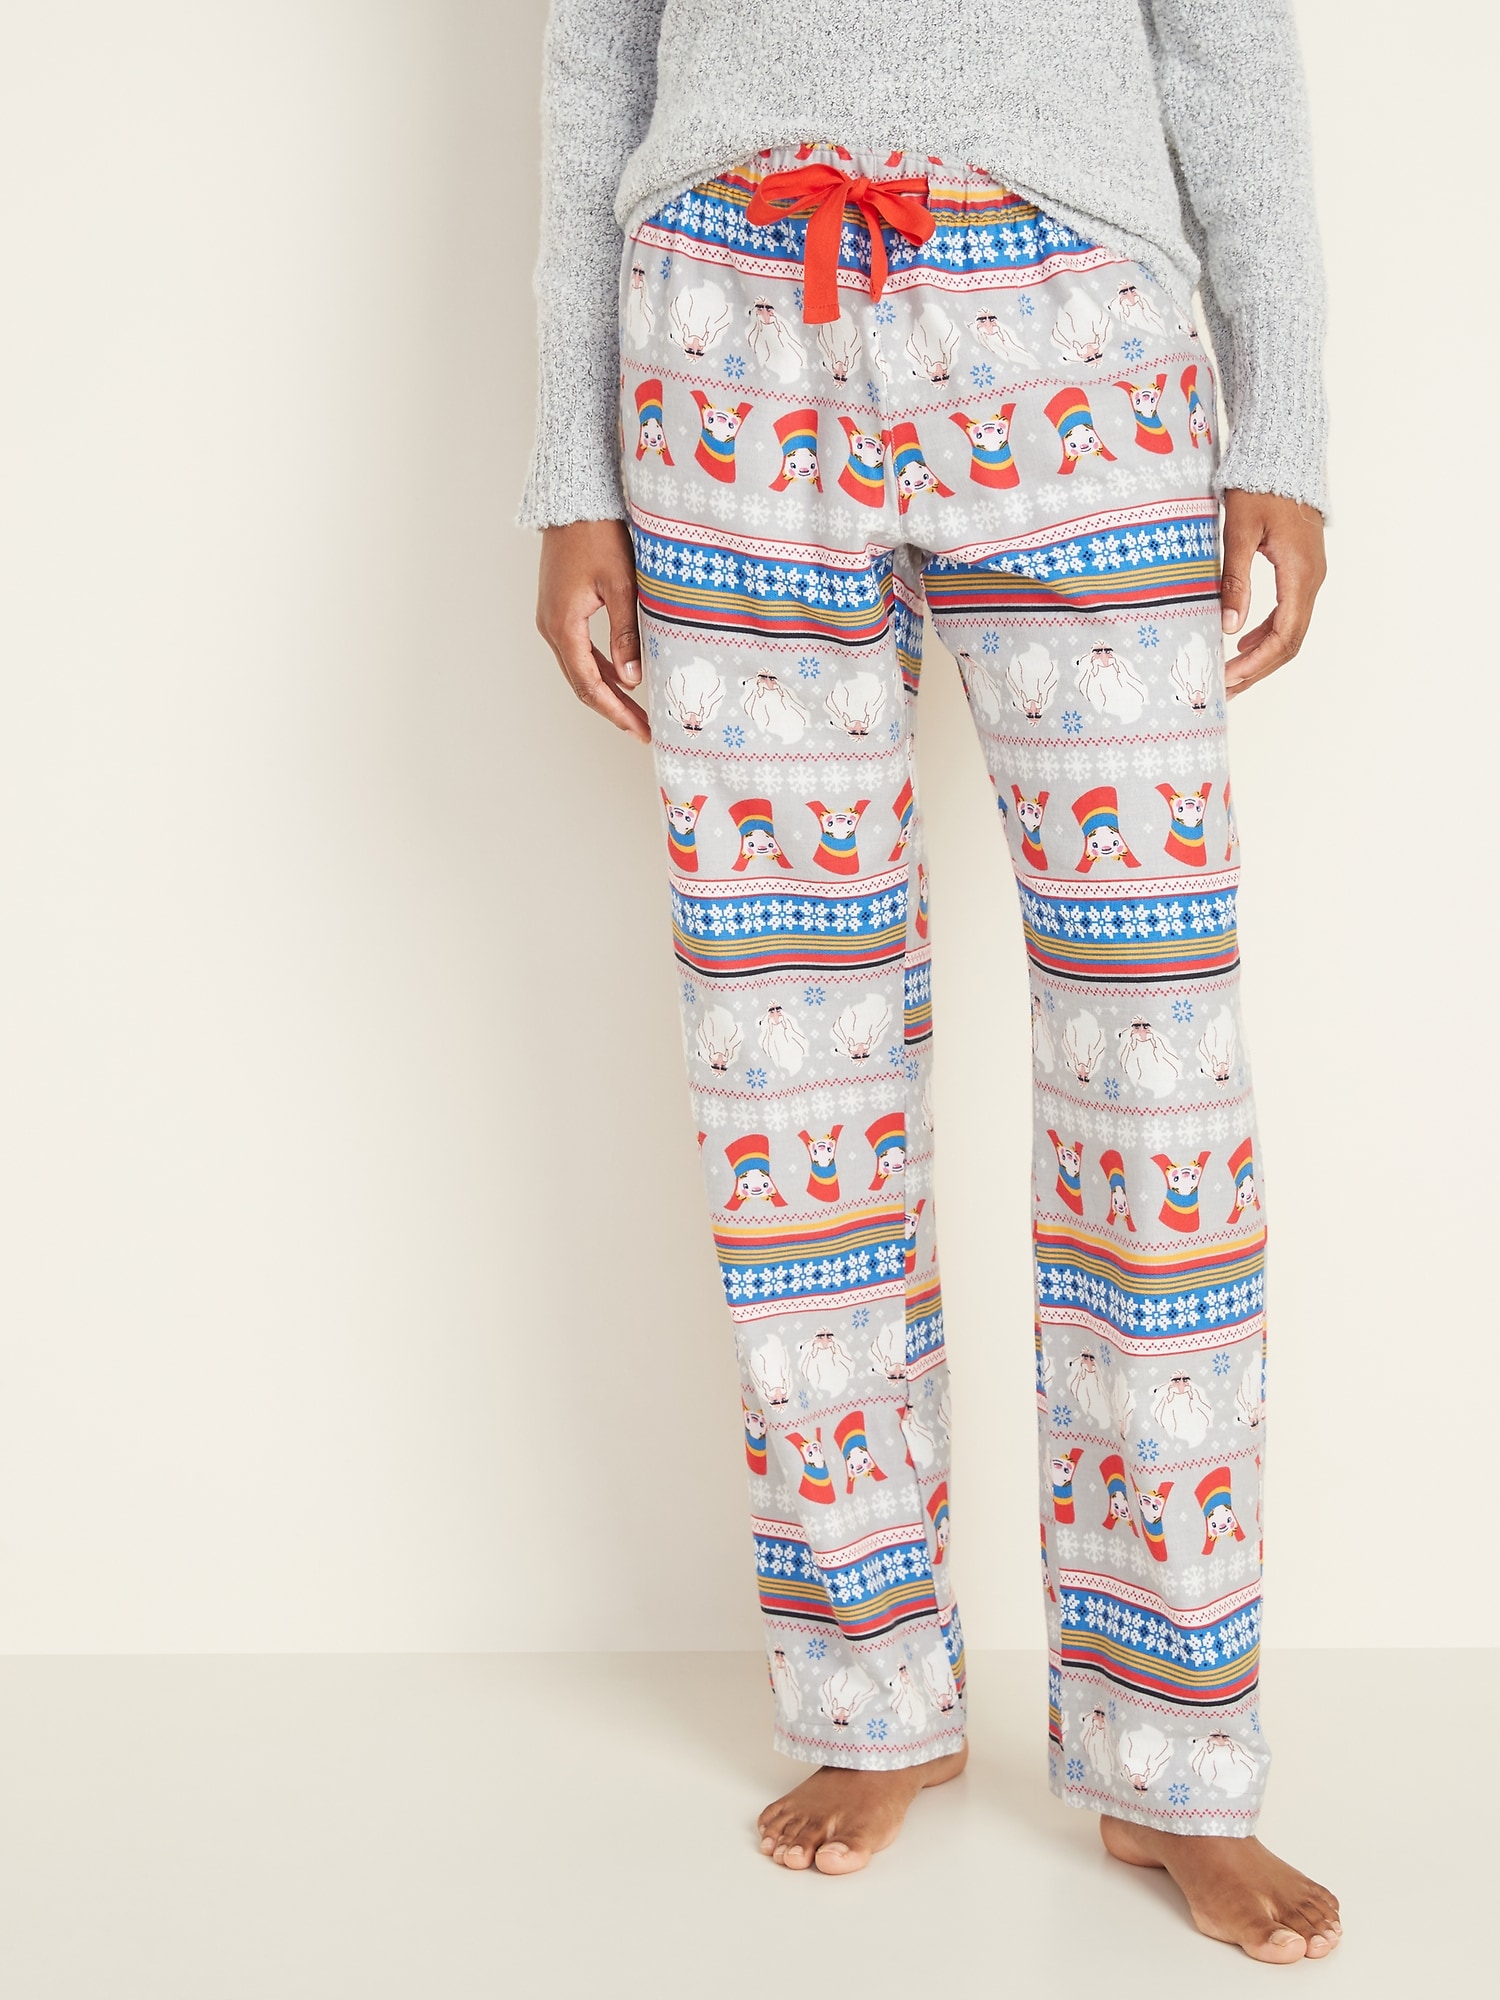 Klaus™ x Old Navy Flannel Pajama Pants for Women